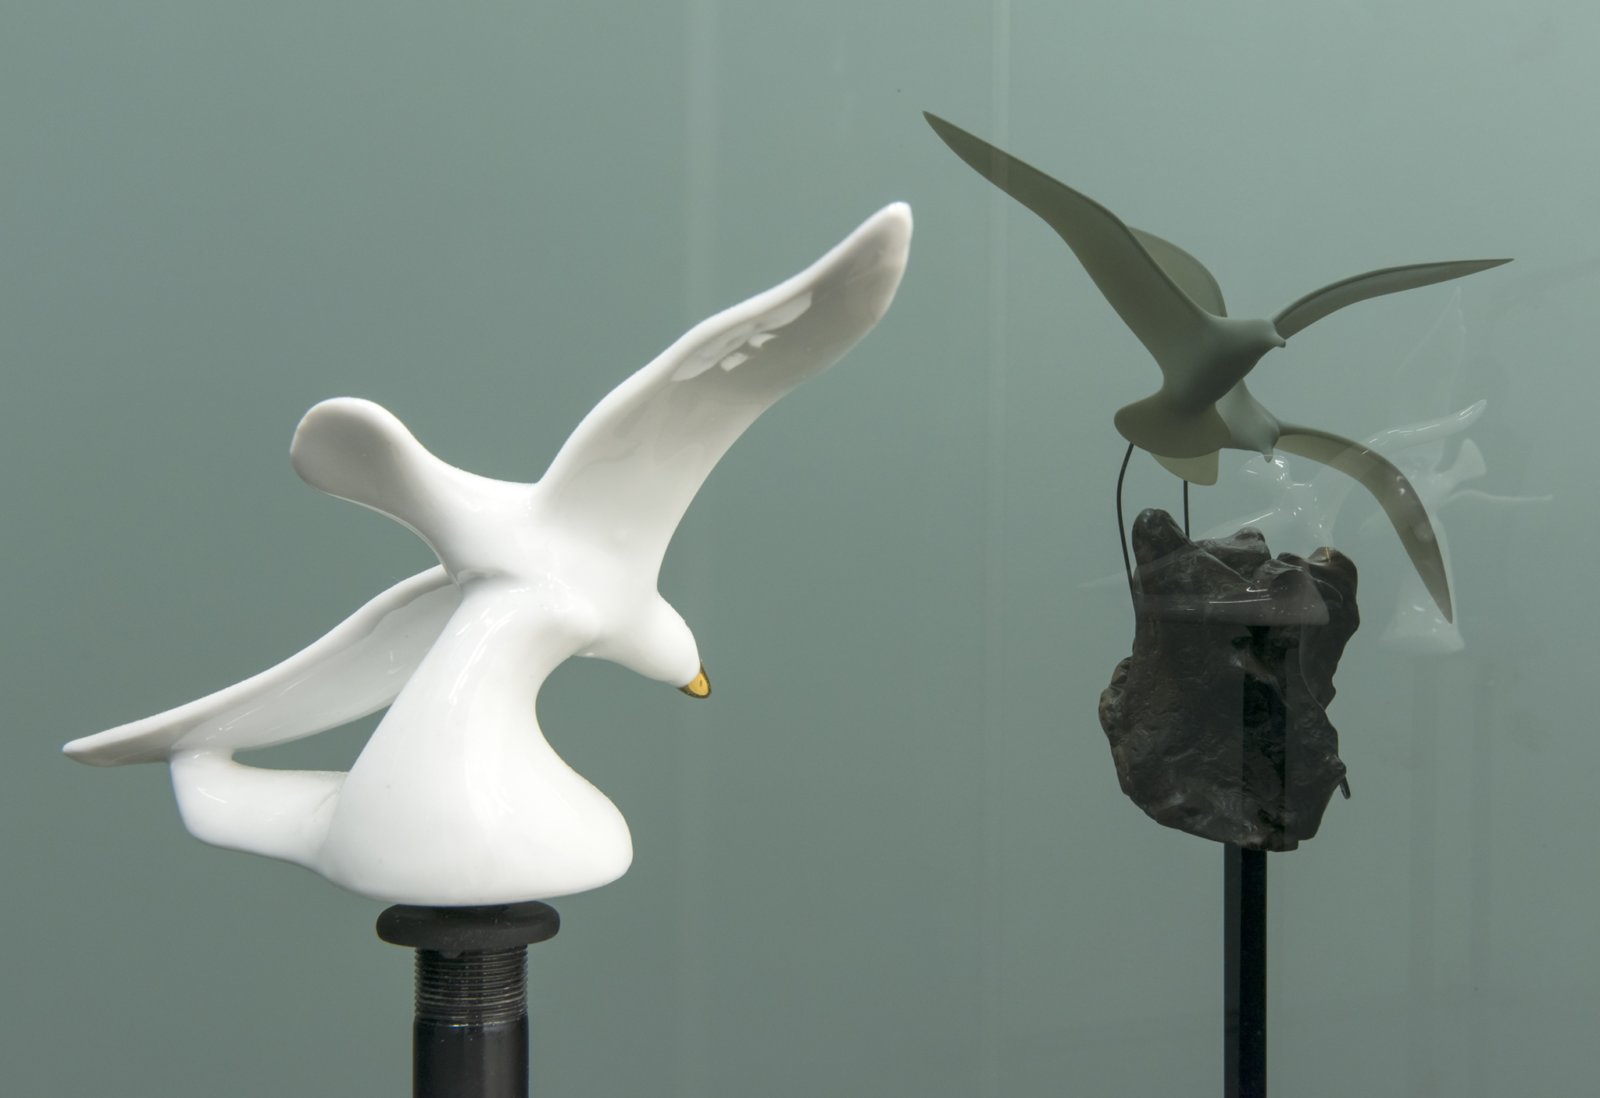 Judy Radul, Connector Divider (Hawks, Sparrows, Pigeons, Doves, Ducks, Eagles) (detail), 2018, salvaged glass, aluminum, found ceramic figurines, microphone stands, 82 x 96 x 231 in. (207 x 244 x 587 cm)